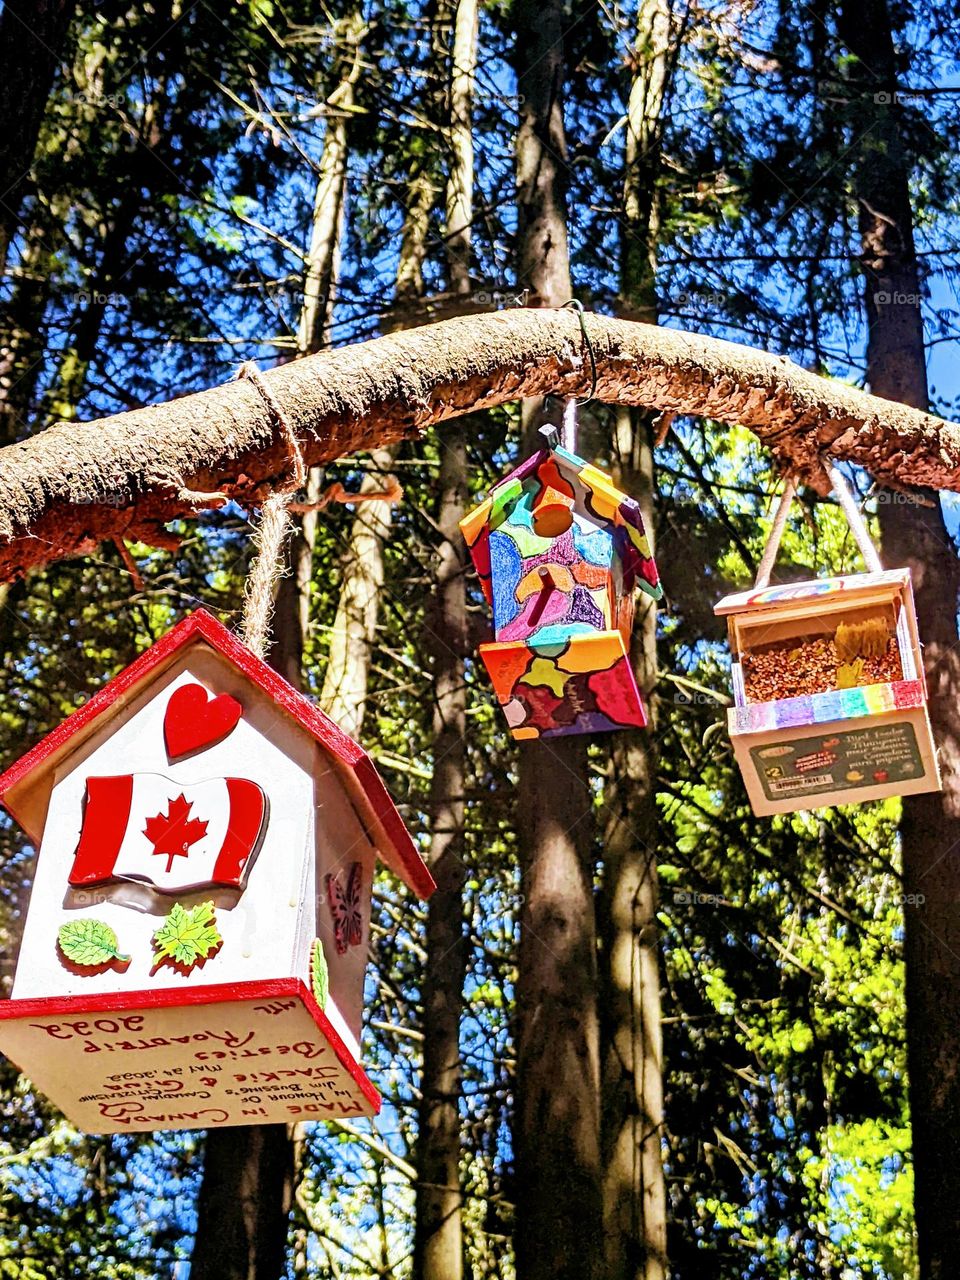 canadian bird house in the forrest on a treetrunk